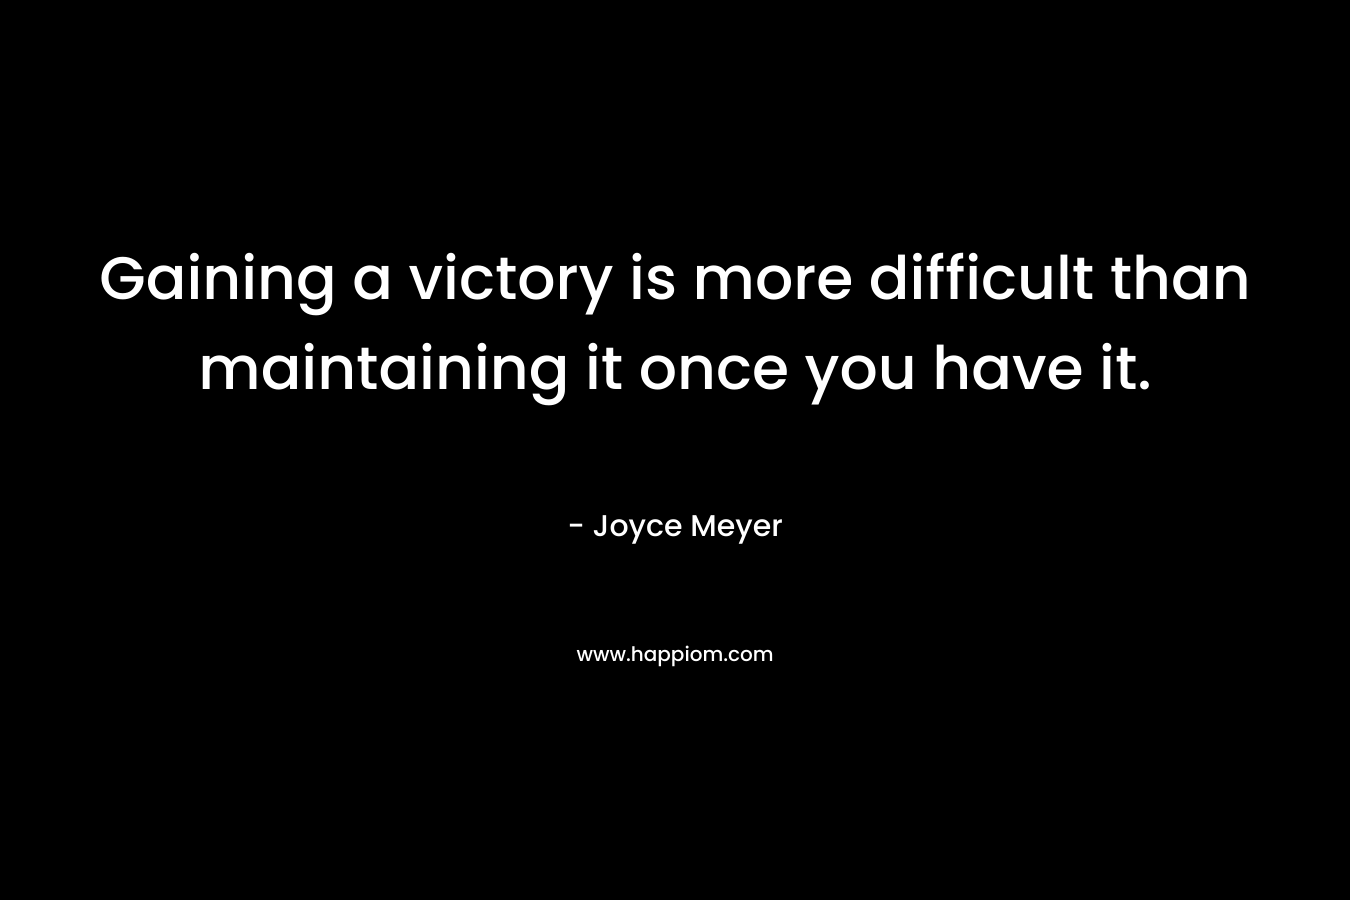 Gaining a victory is more difficult than maintaining it once you have it.